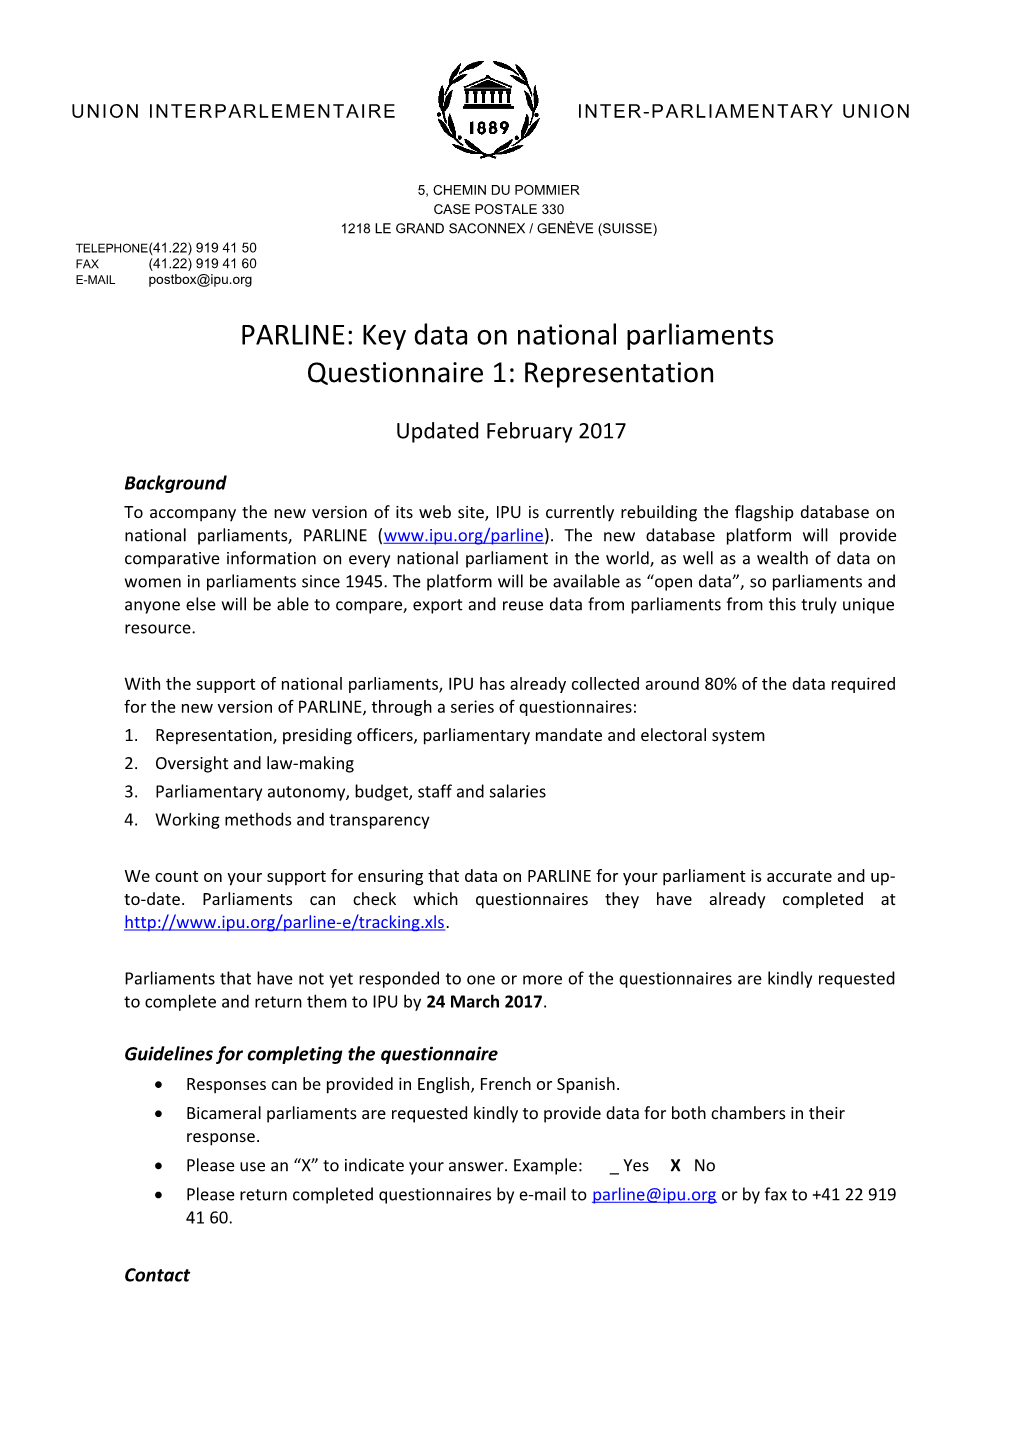 PARLINE: Key Data on National Parliaments